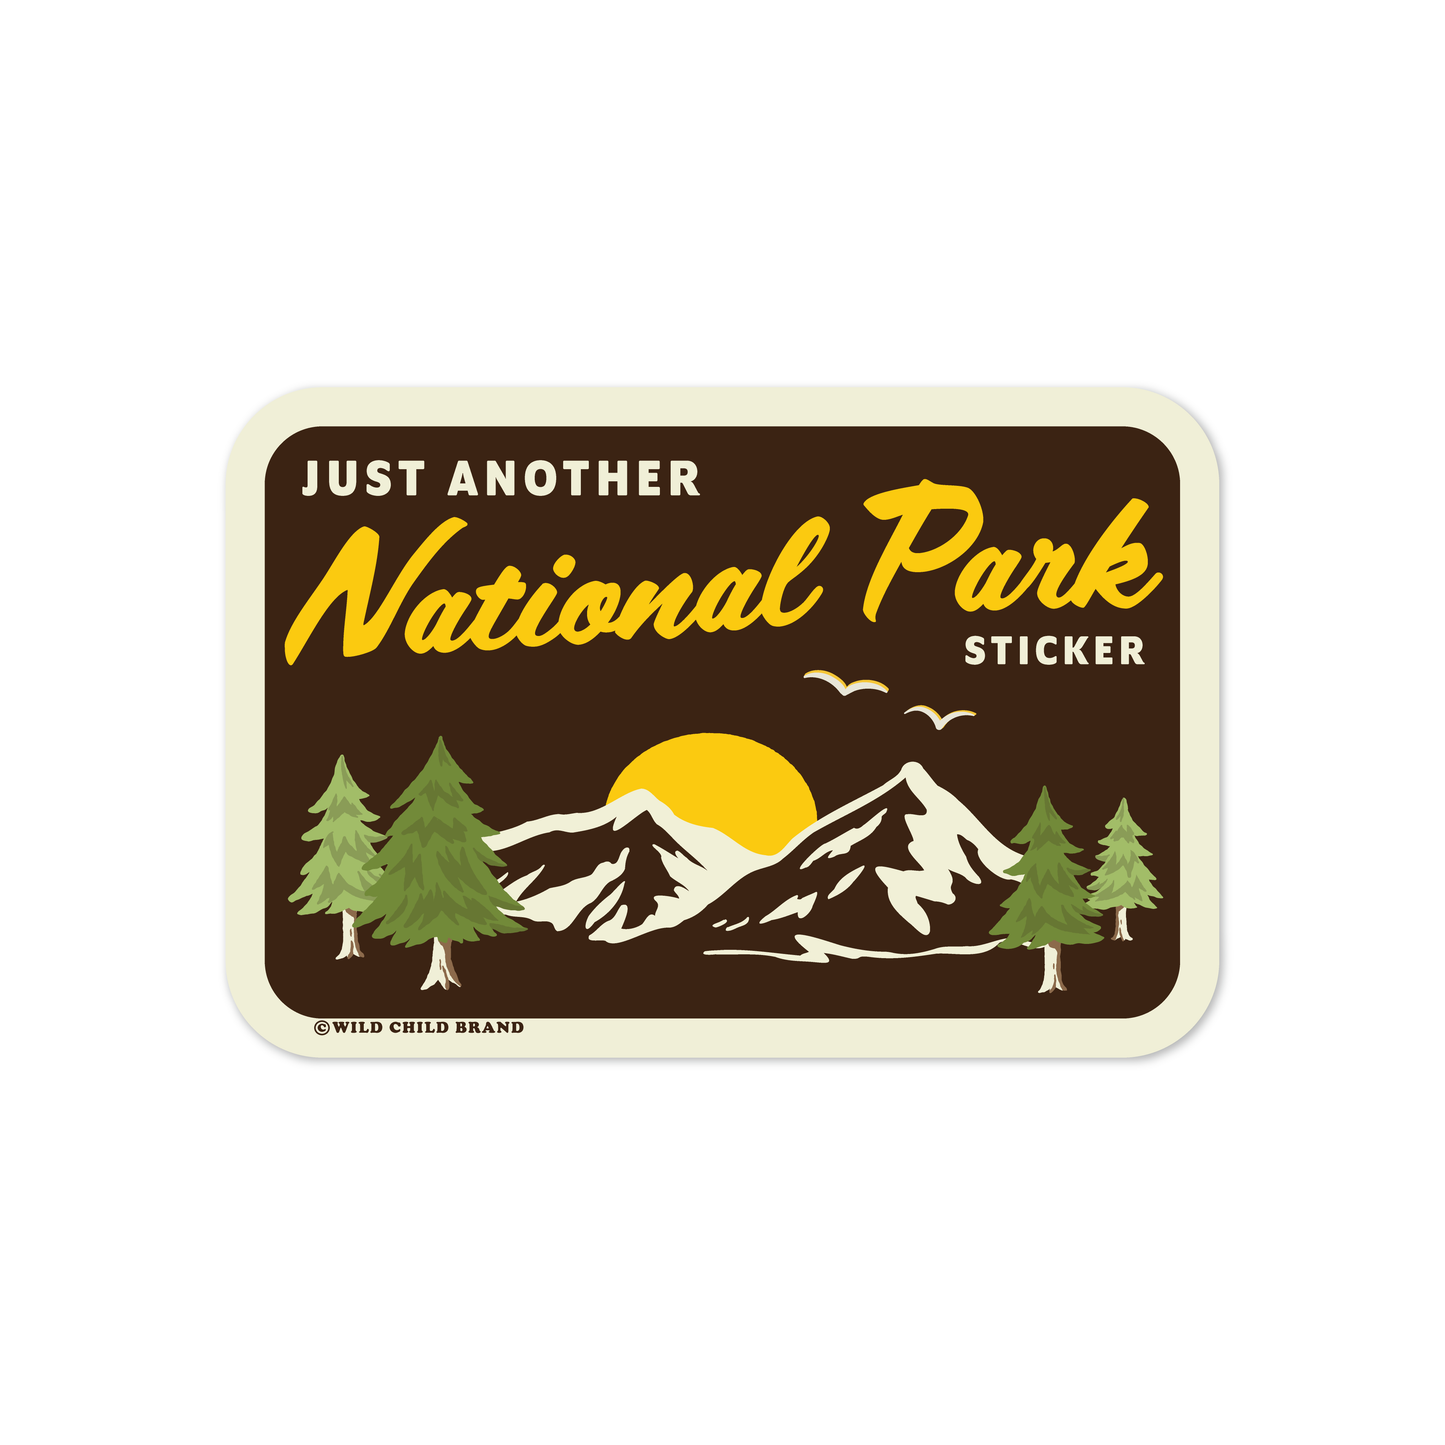 Another National Park Sticker